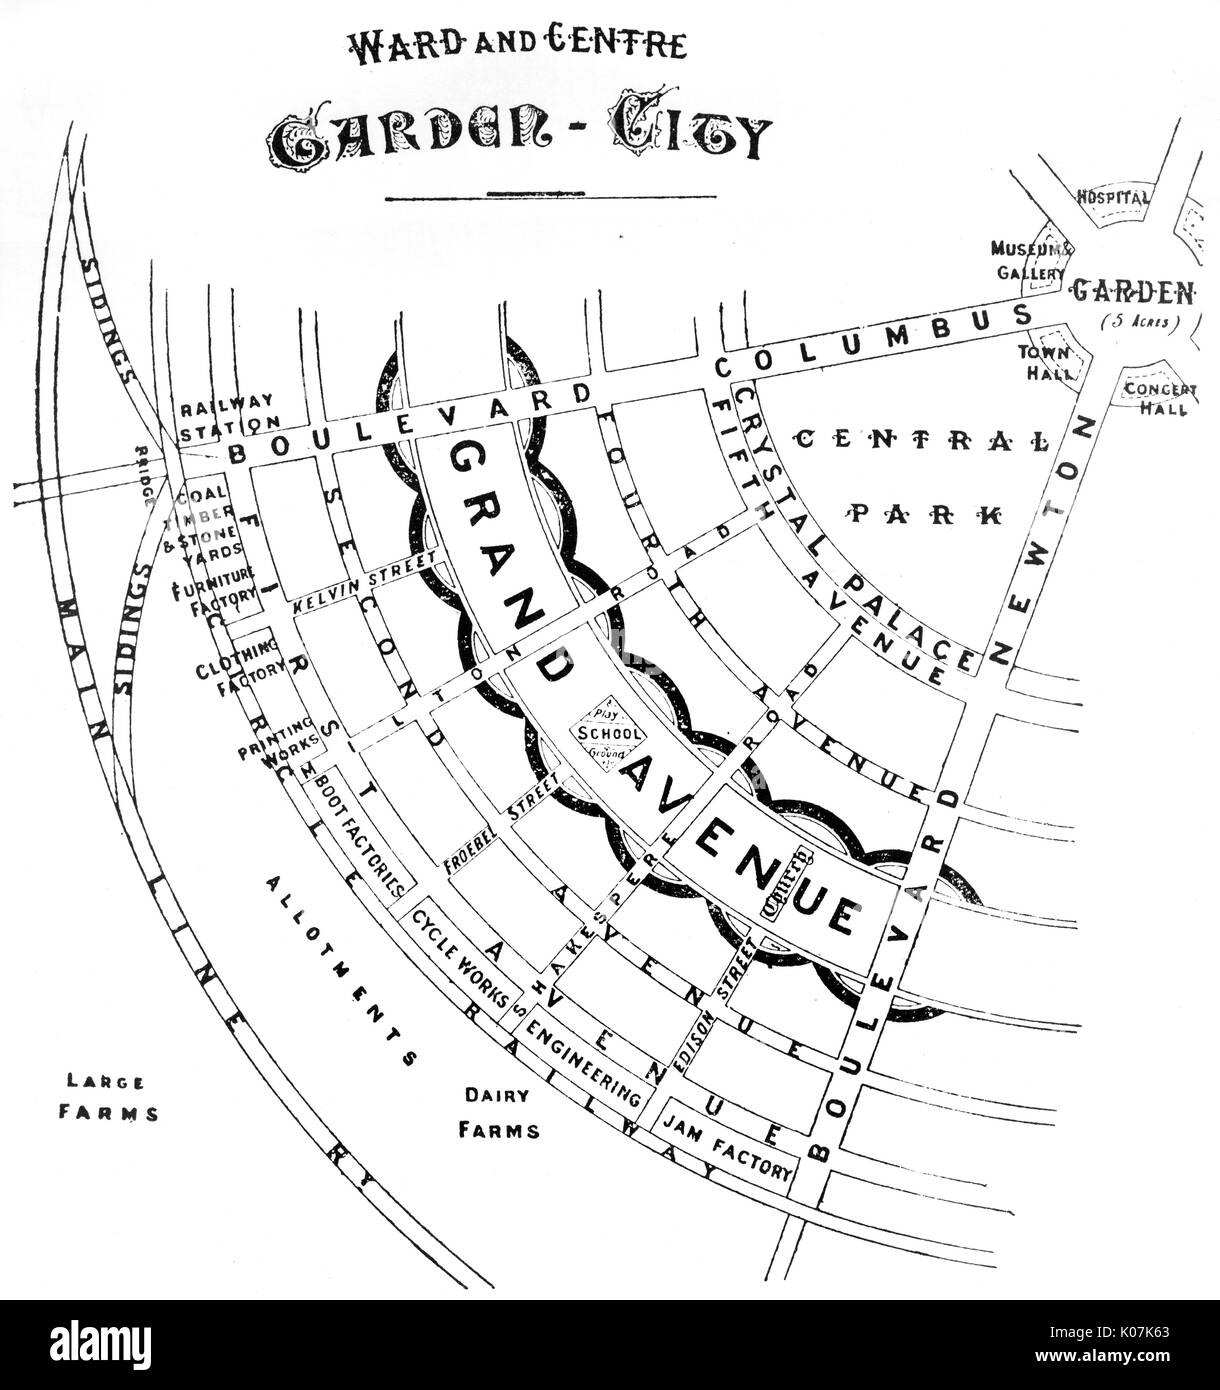 Ebenezer Howard's plan of a section of a garden city - ward and centre.     Date: 1898 Stock Photo